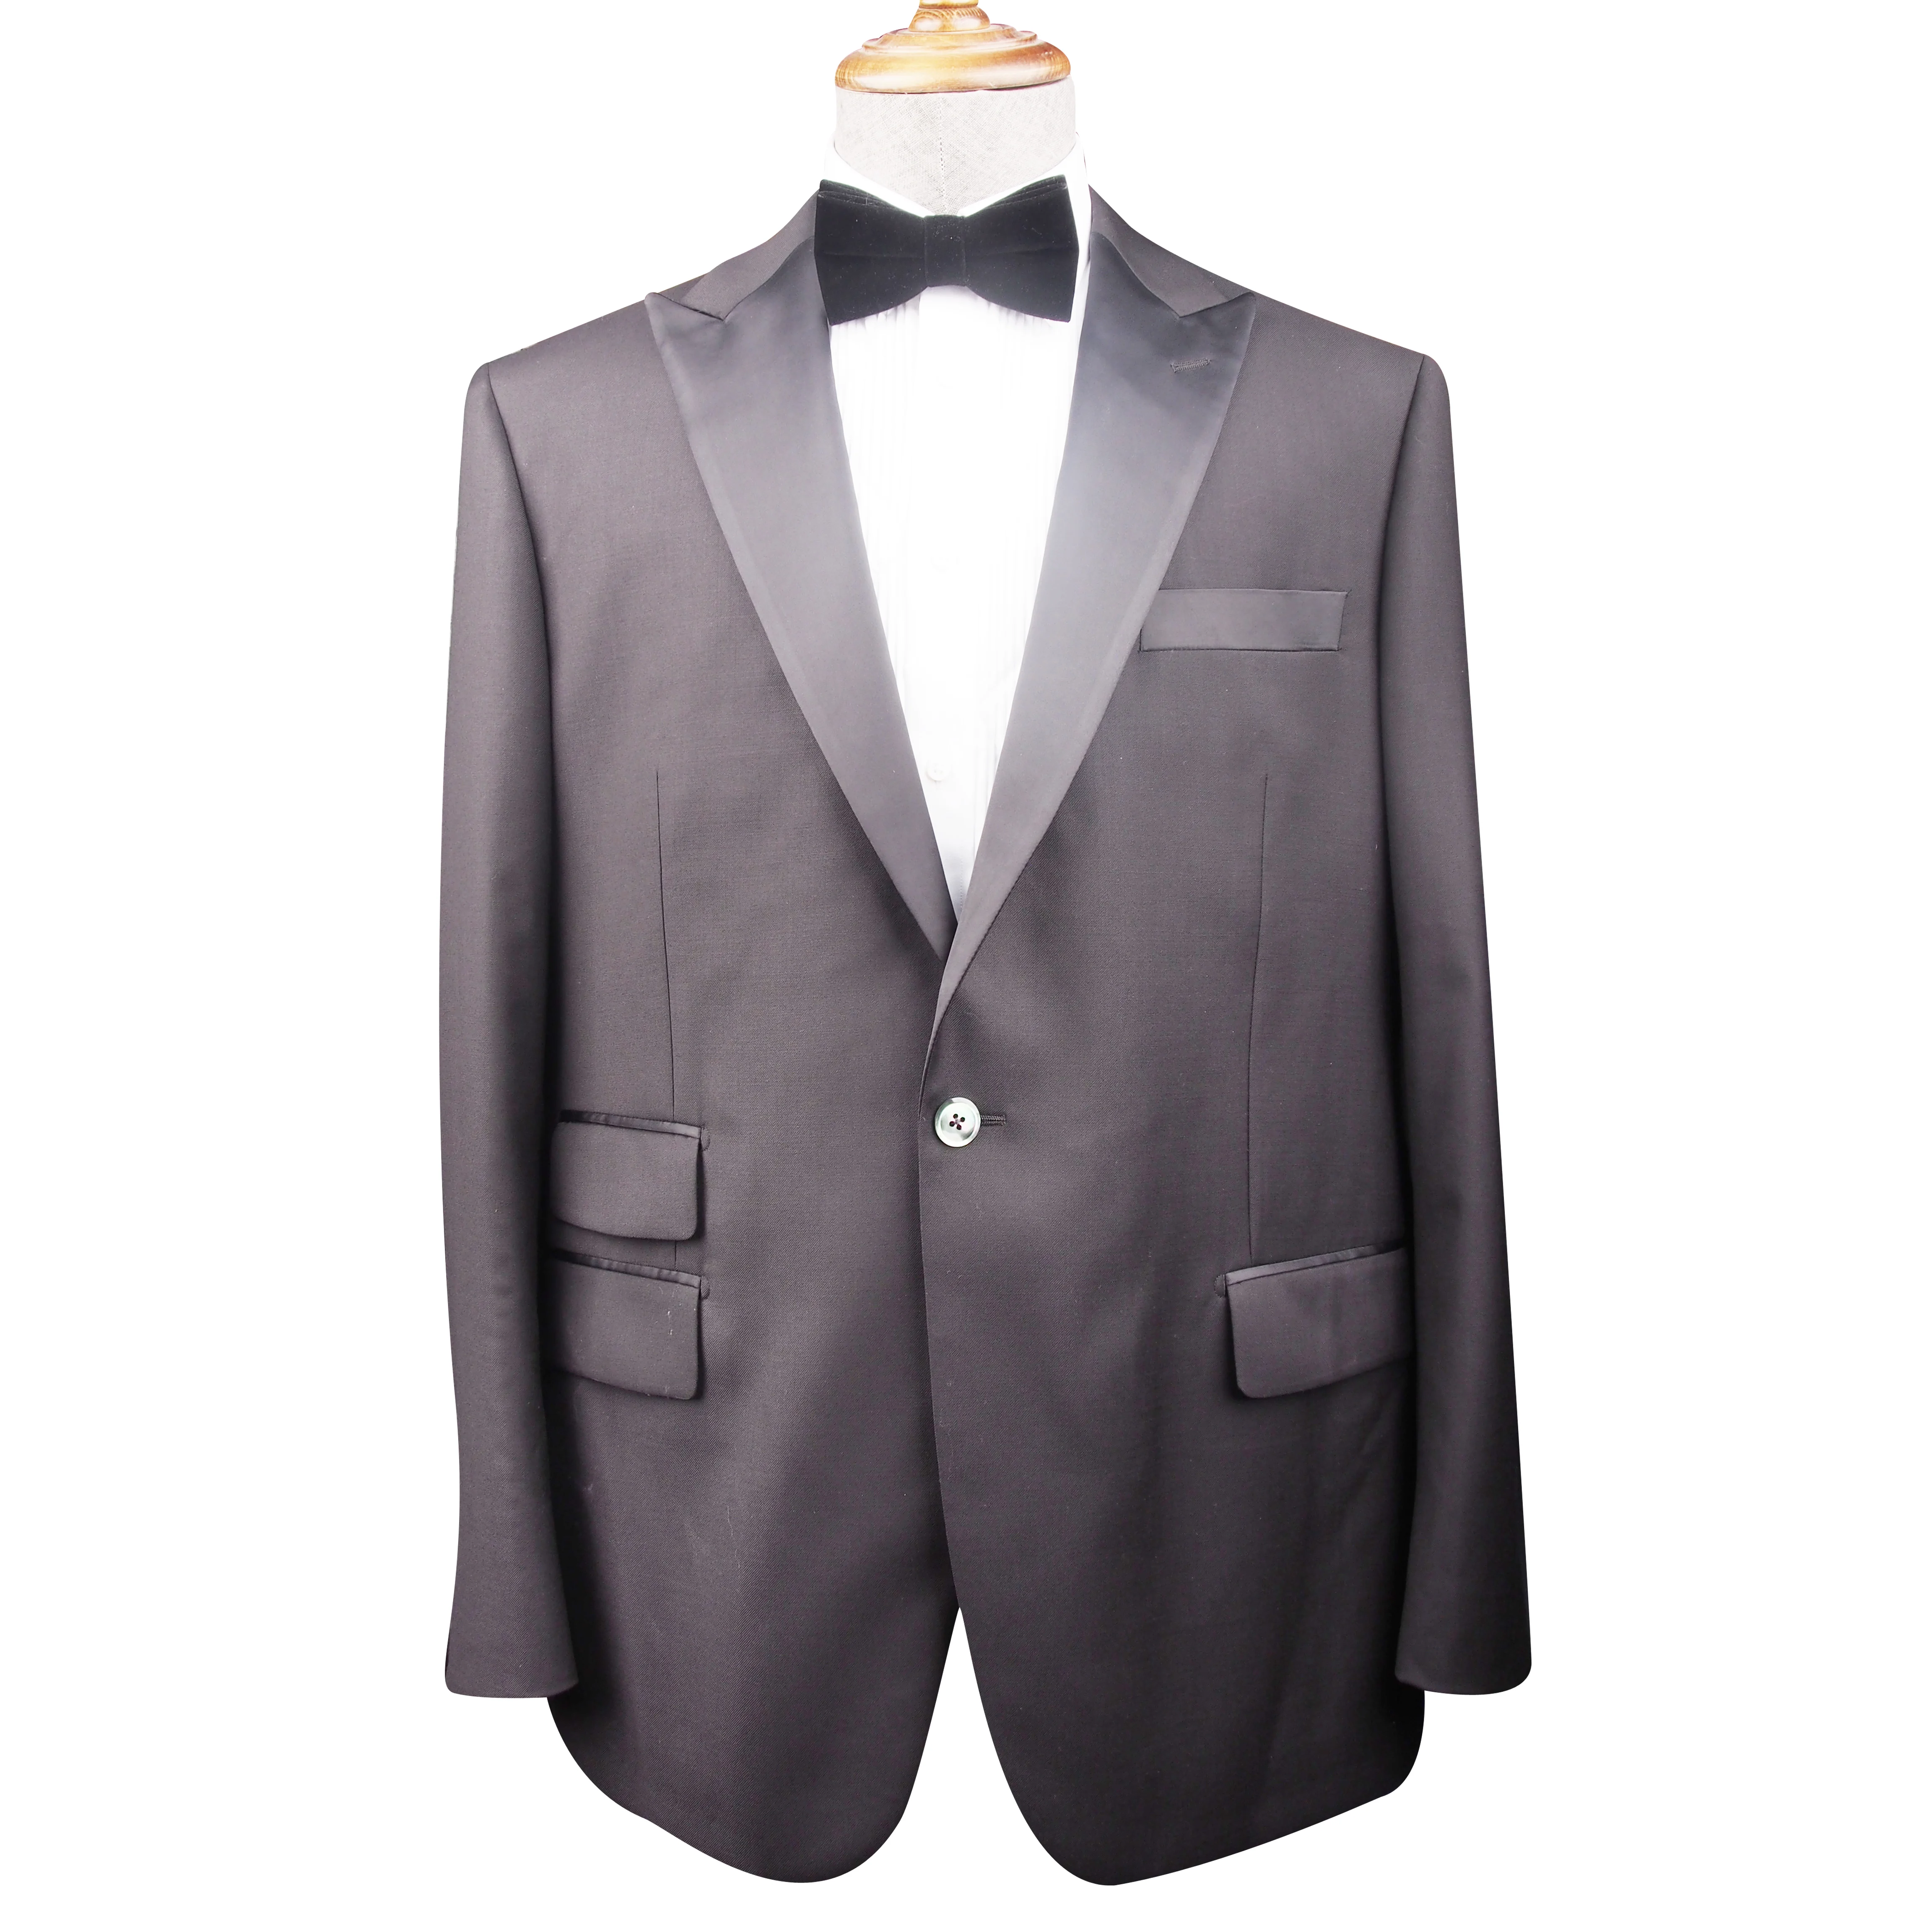 made in China wholesale 2 pieces 100% Wool  Tuxedo Suit modern men’s suit